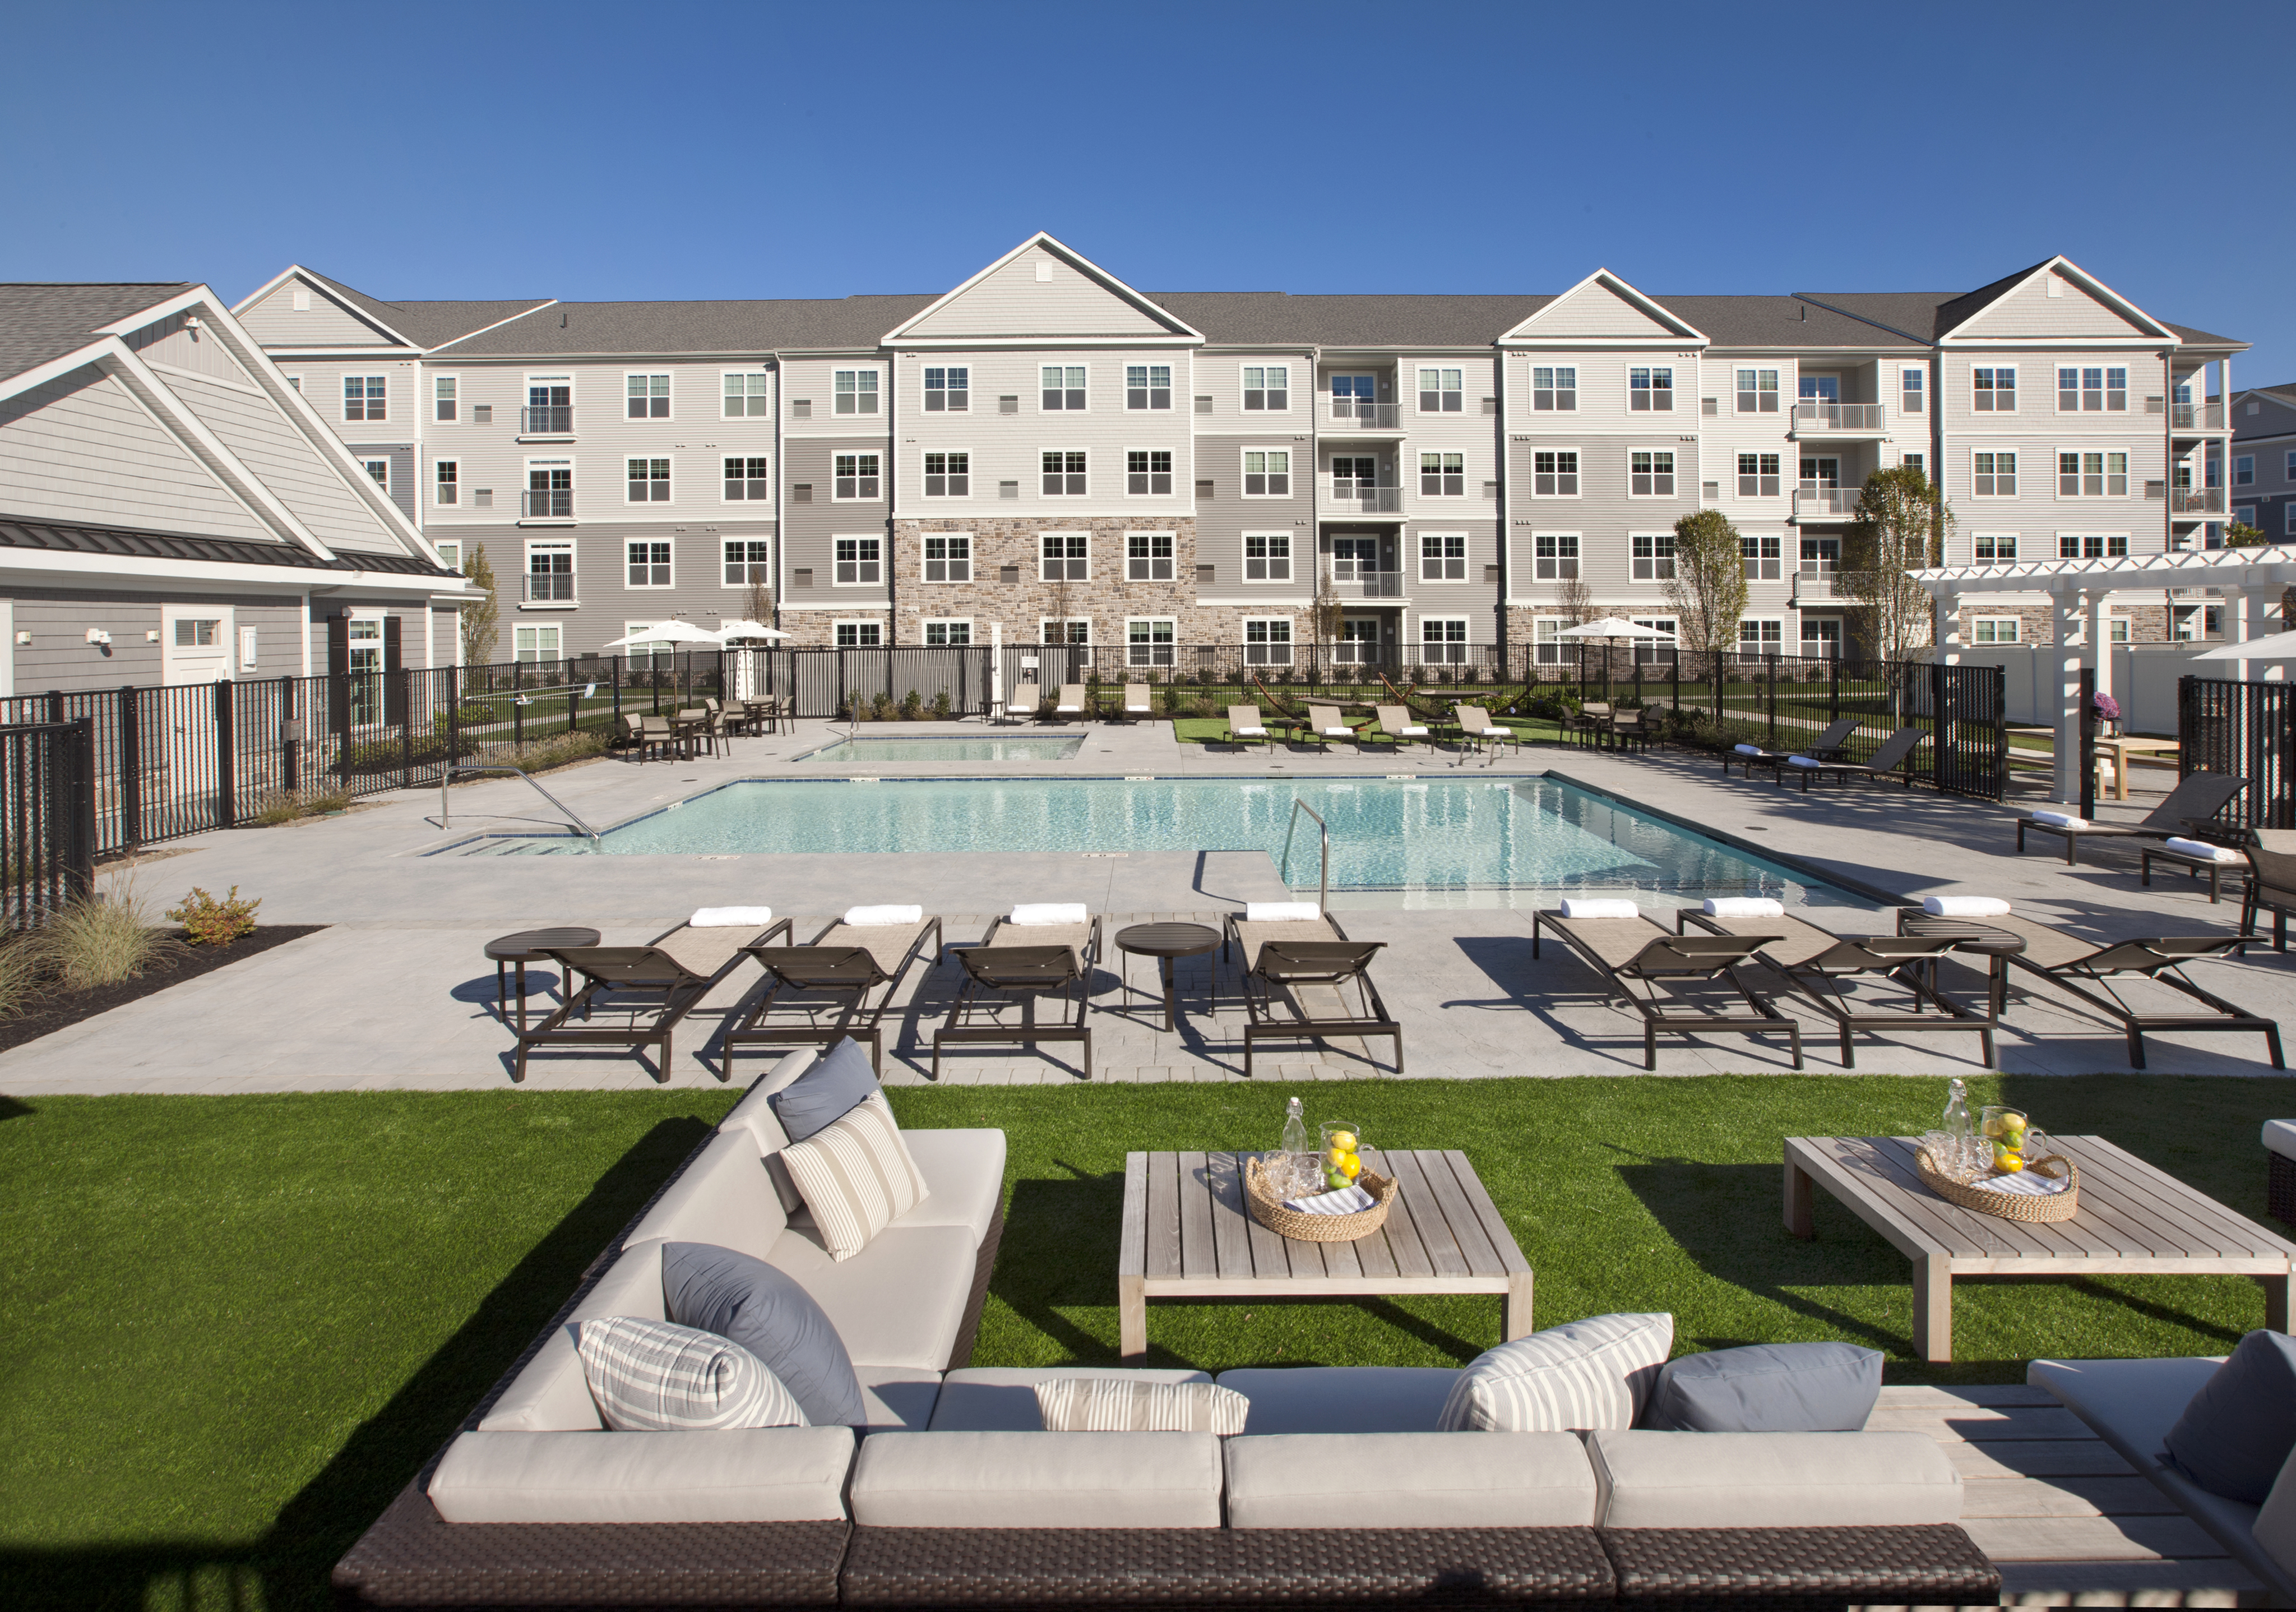 View of Pool Area, Showing Loungers, Outdoor Couches, and Apartment Building in the Background at Parc Westborough Apartments